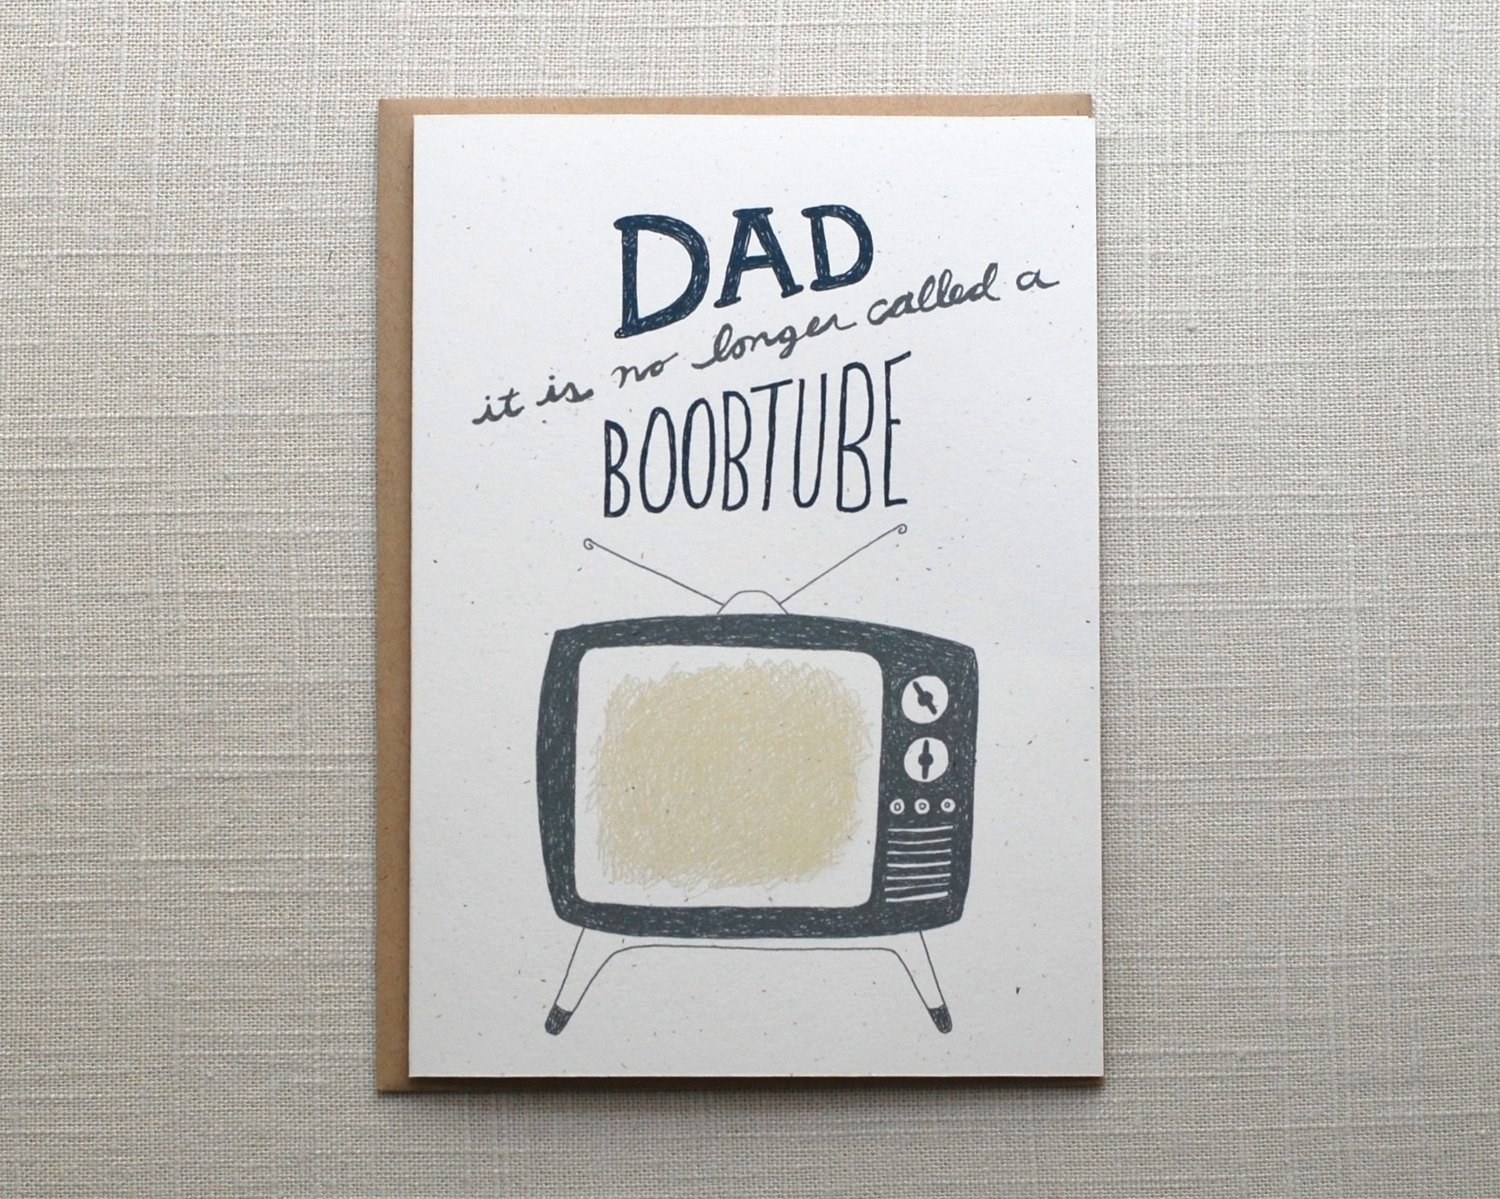 Cool Easy Birthday Card Ideas 96 Birthday Card Ideas For Dad From Toddler Greeting Card Idea